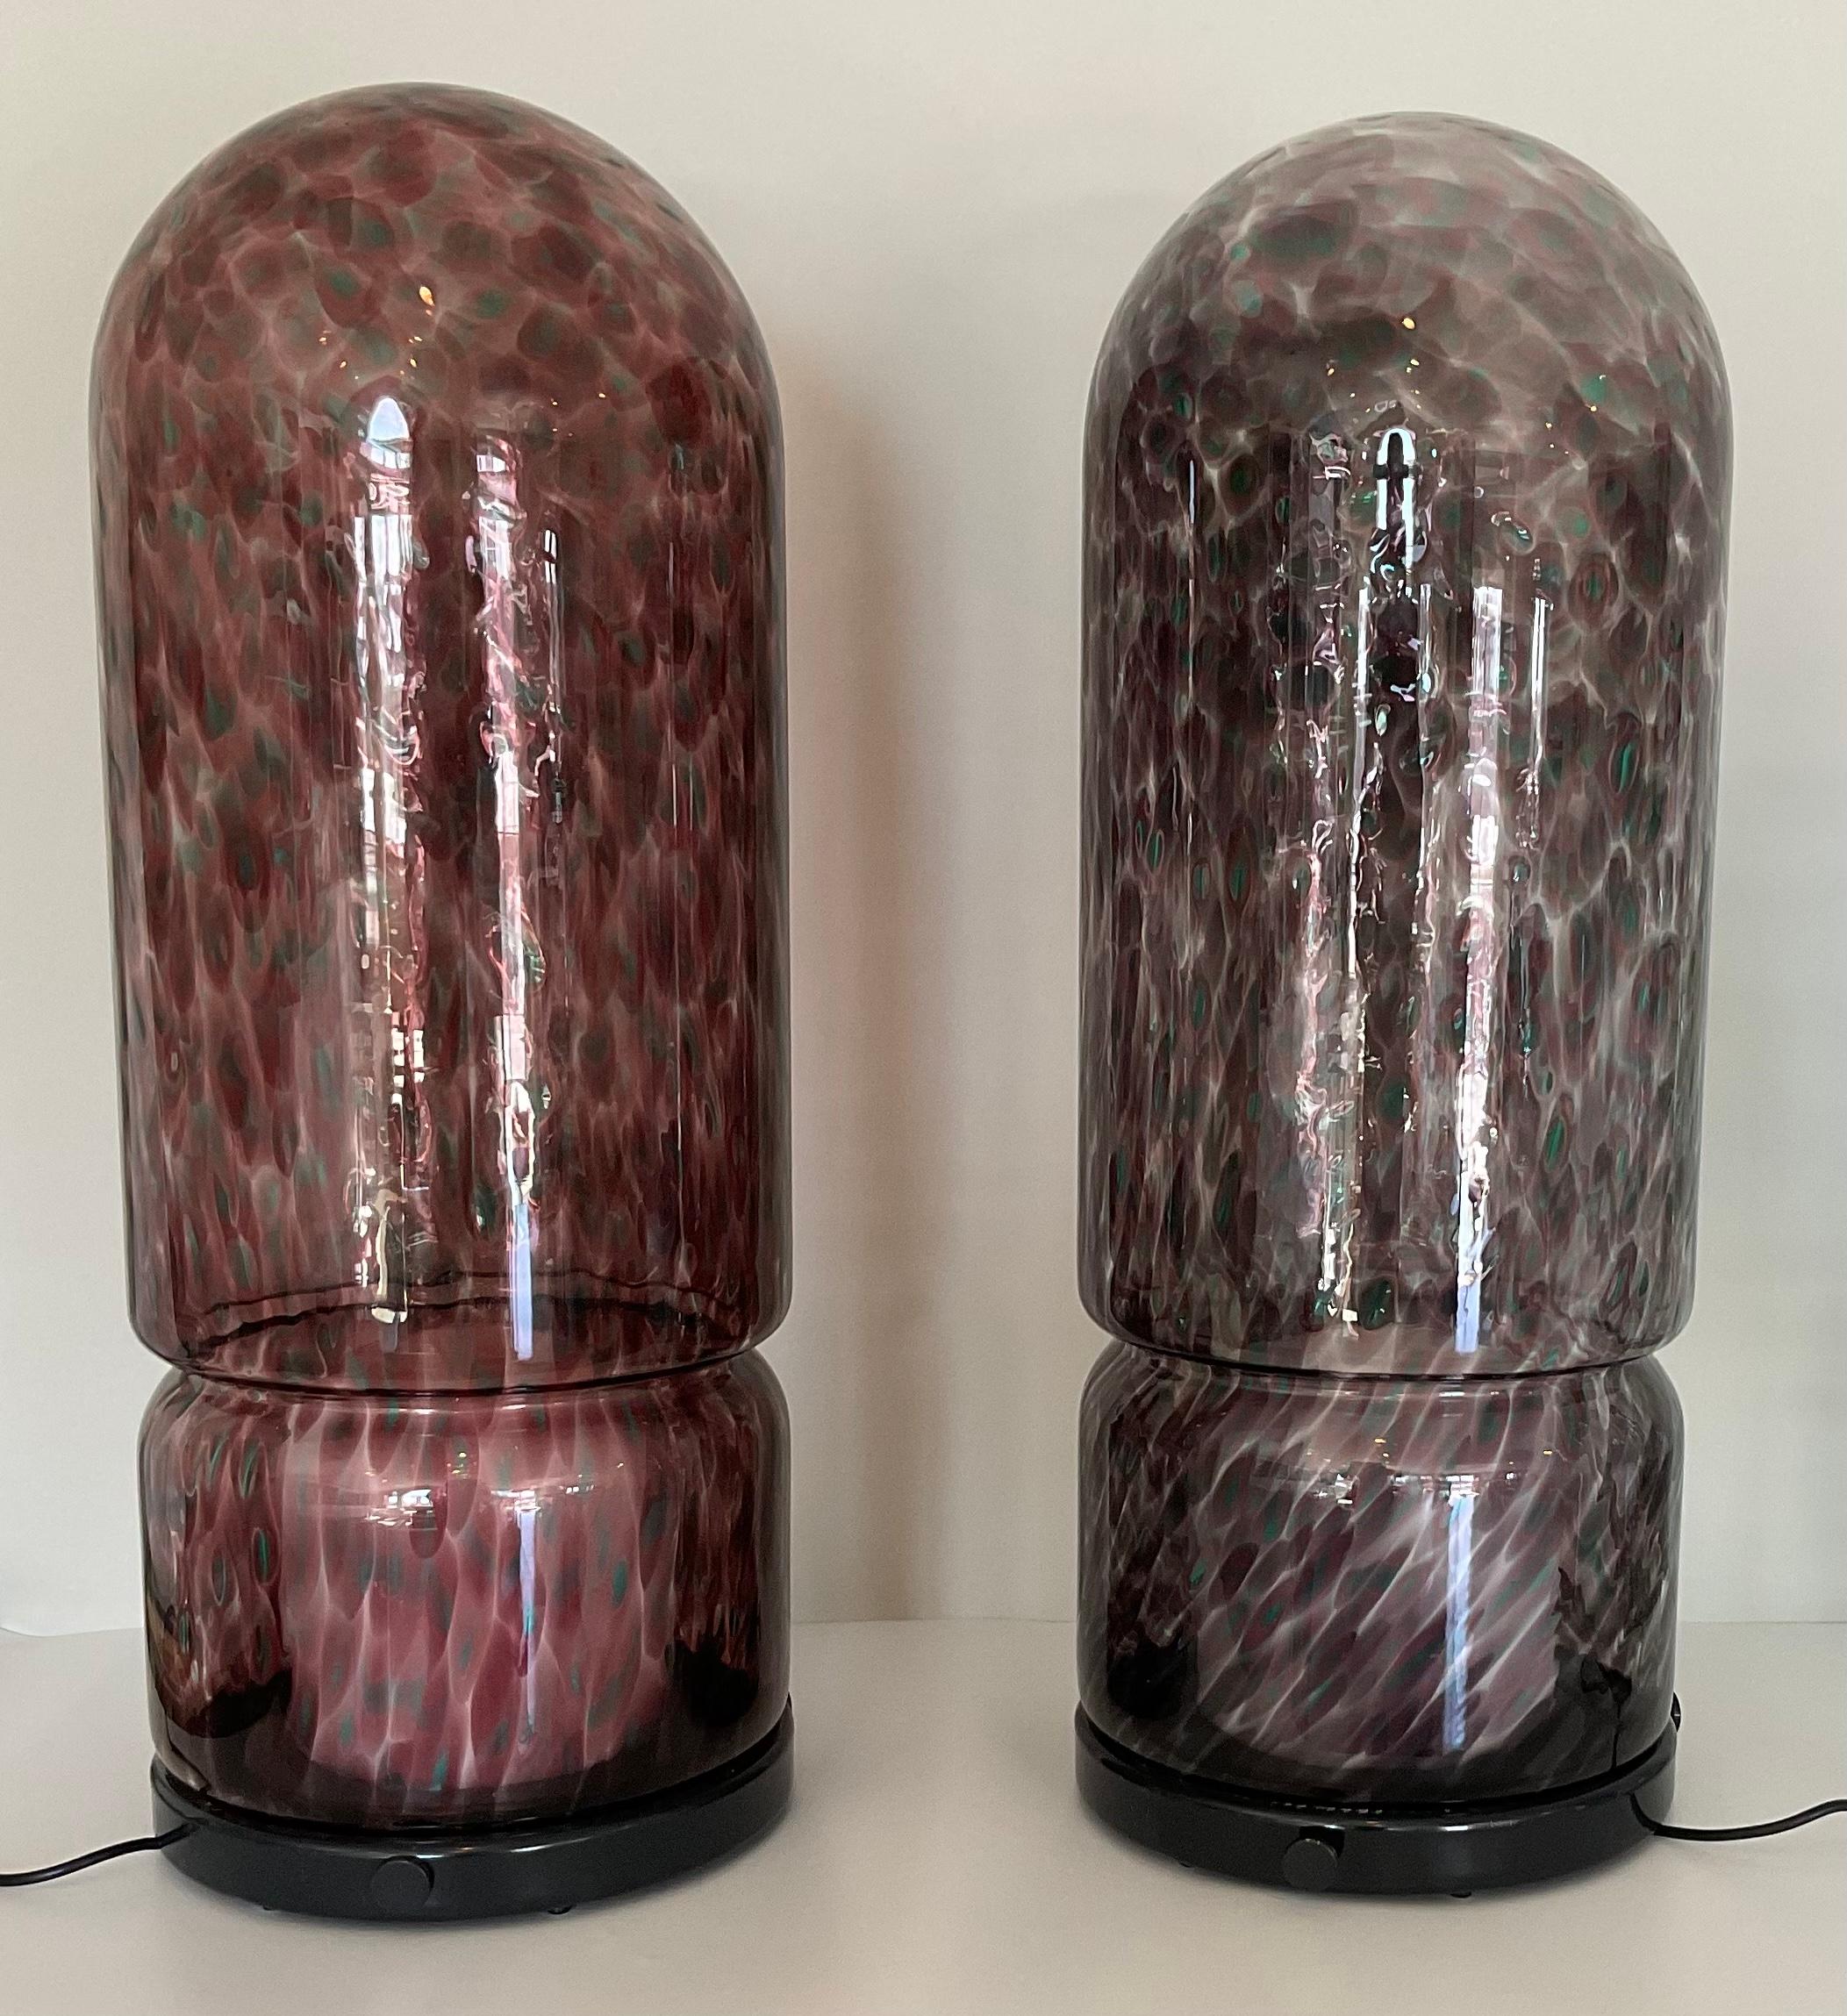 Rare pair of Vistosi Glicene De Terra Murrine table lamps or floor lamps in plum. These lamps were designed by Gae Aulenti and are seldom seen on the open market. Finding a pair is virtually impossible. These lamps are new old stock and have been in